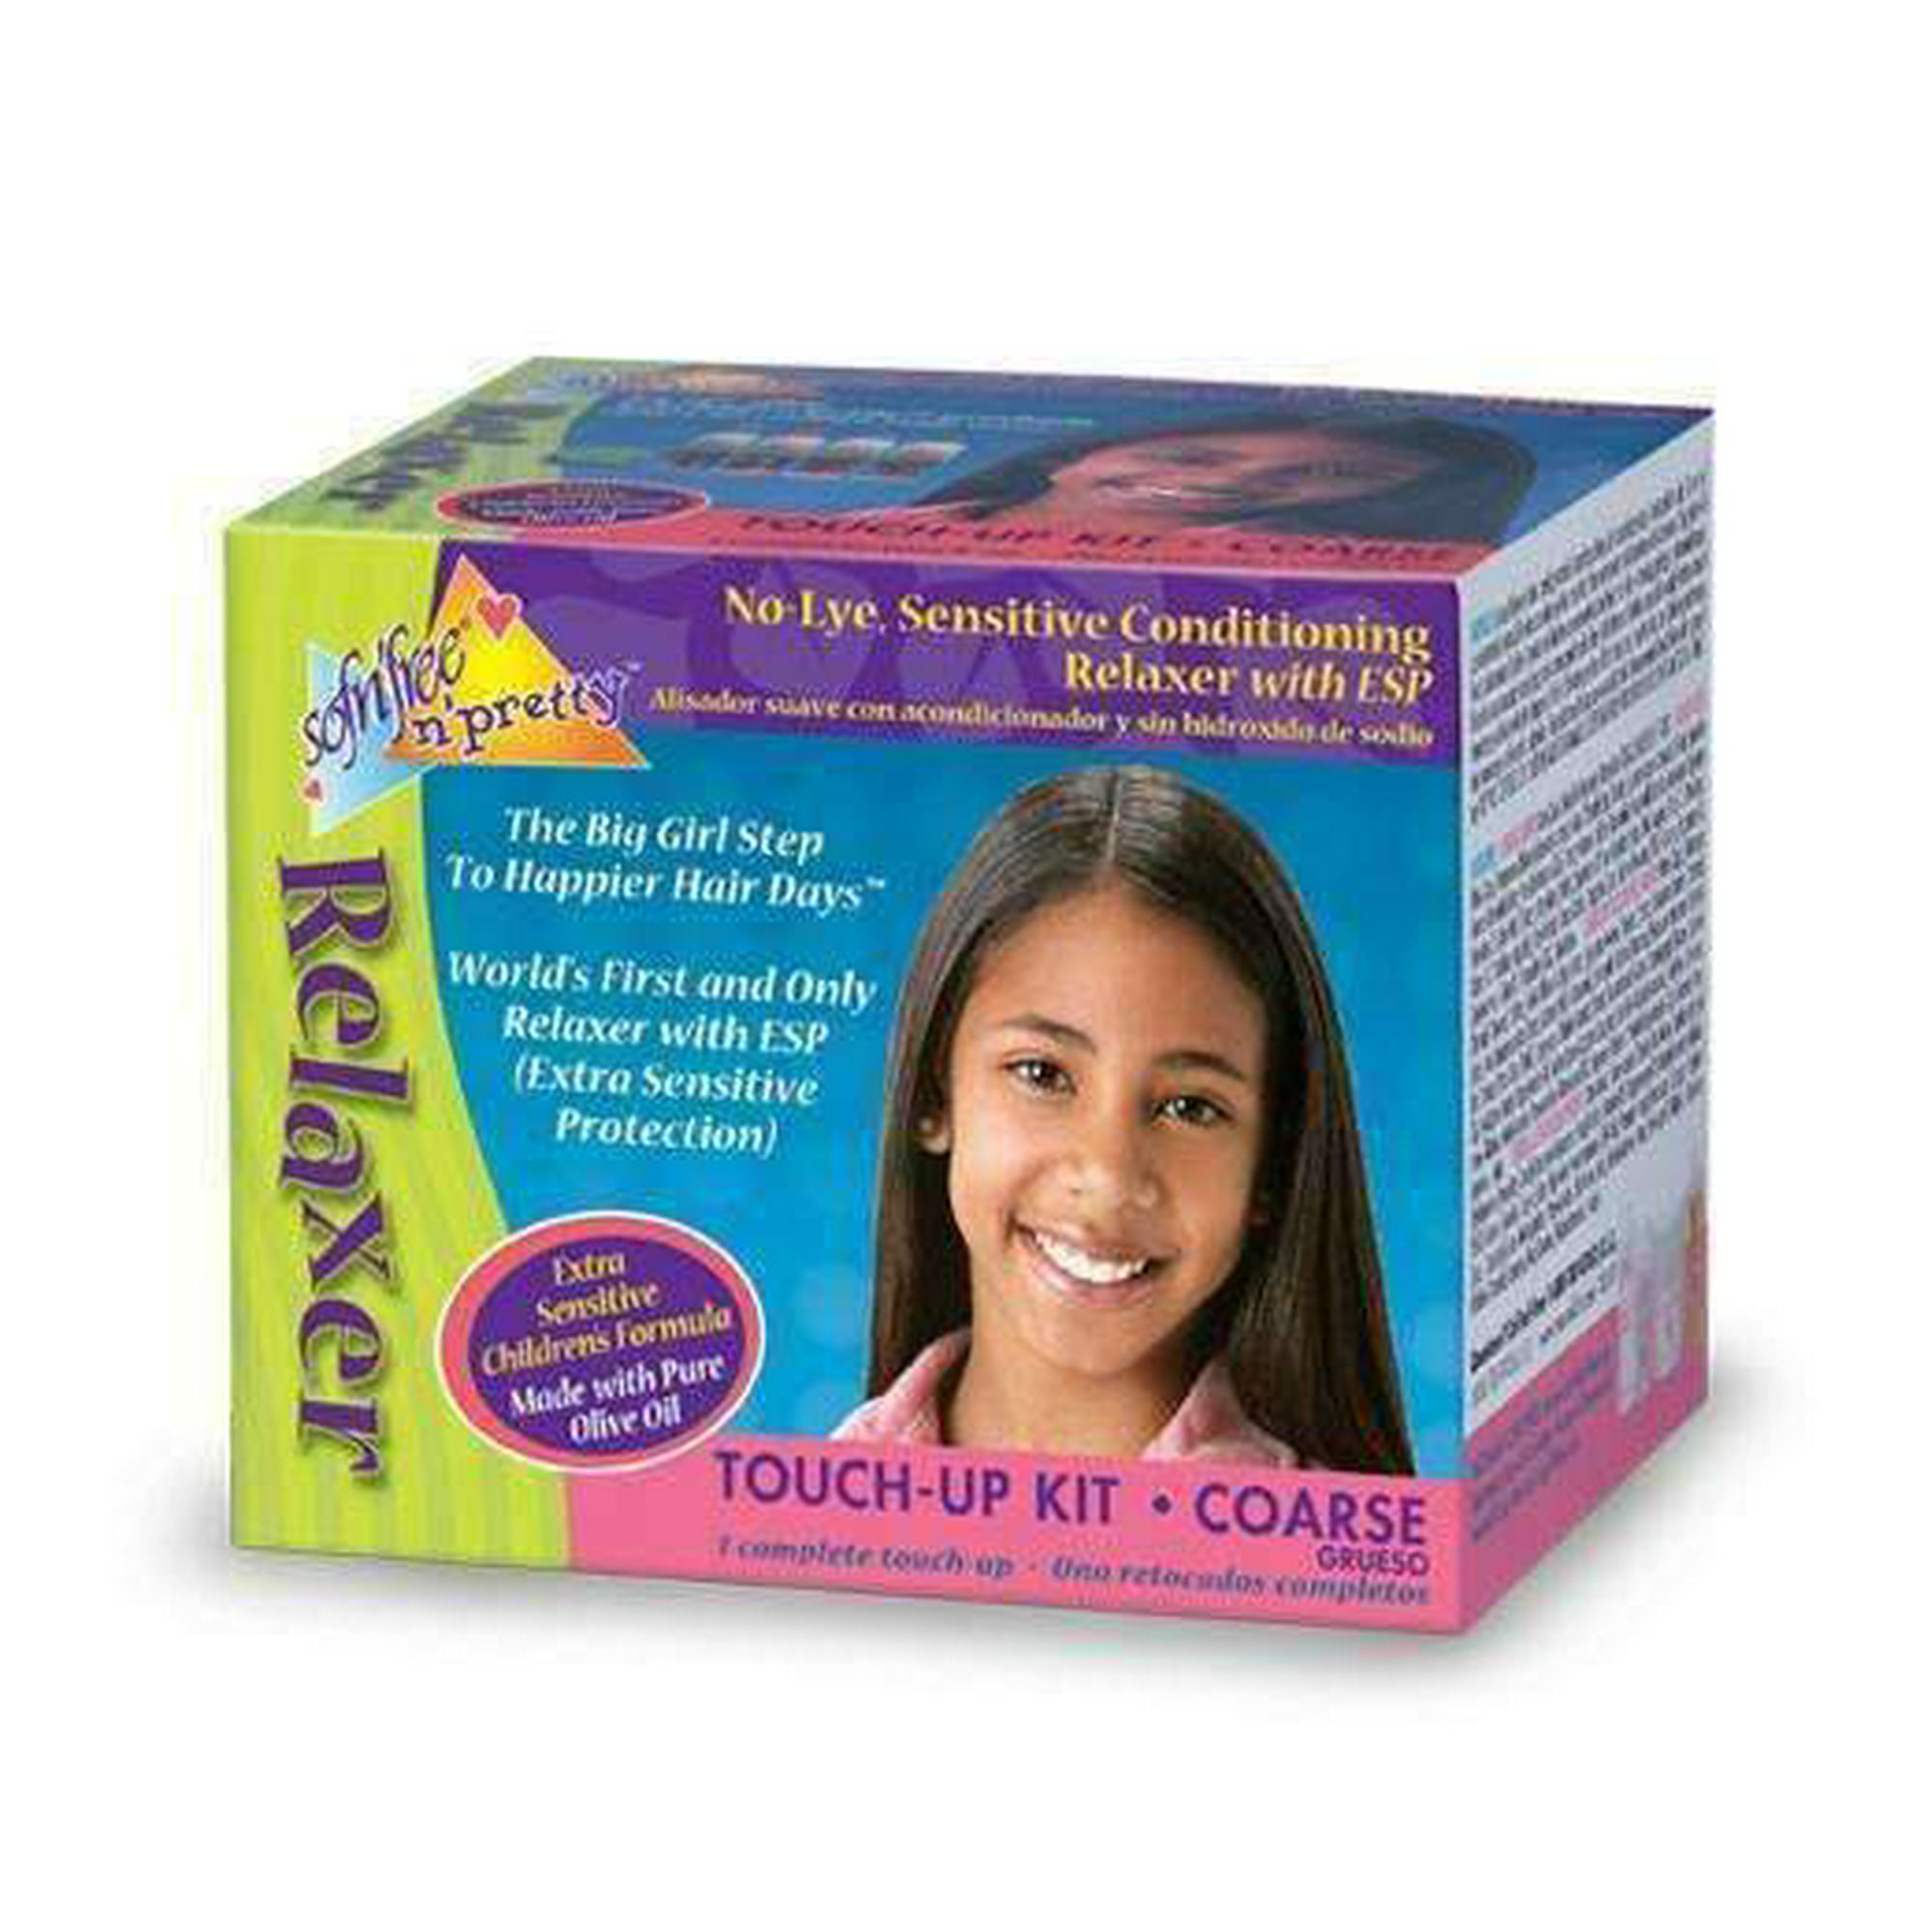 Sofn'free N' Pretty Touch-Up Relaxer Kit-Coarse | Walmart Canada